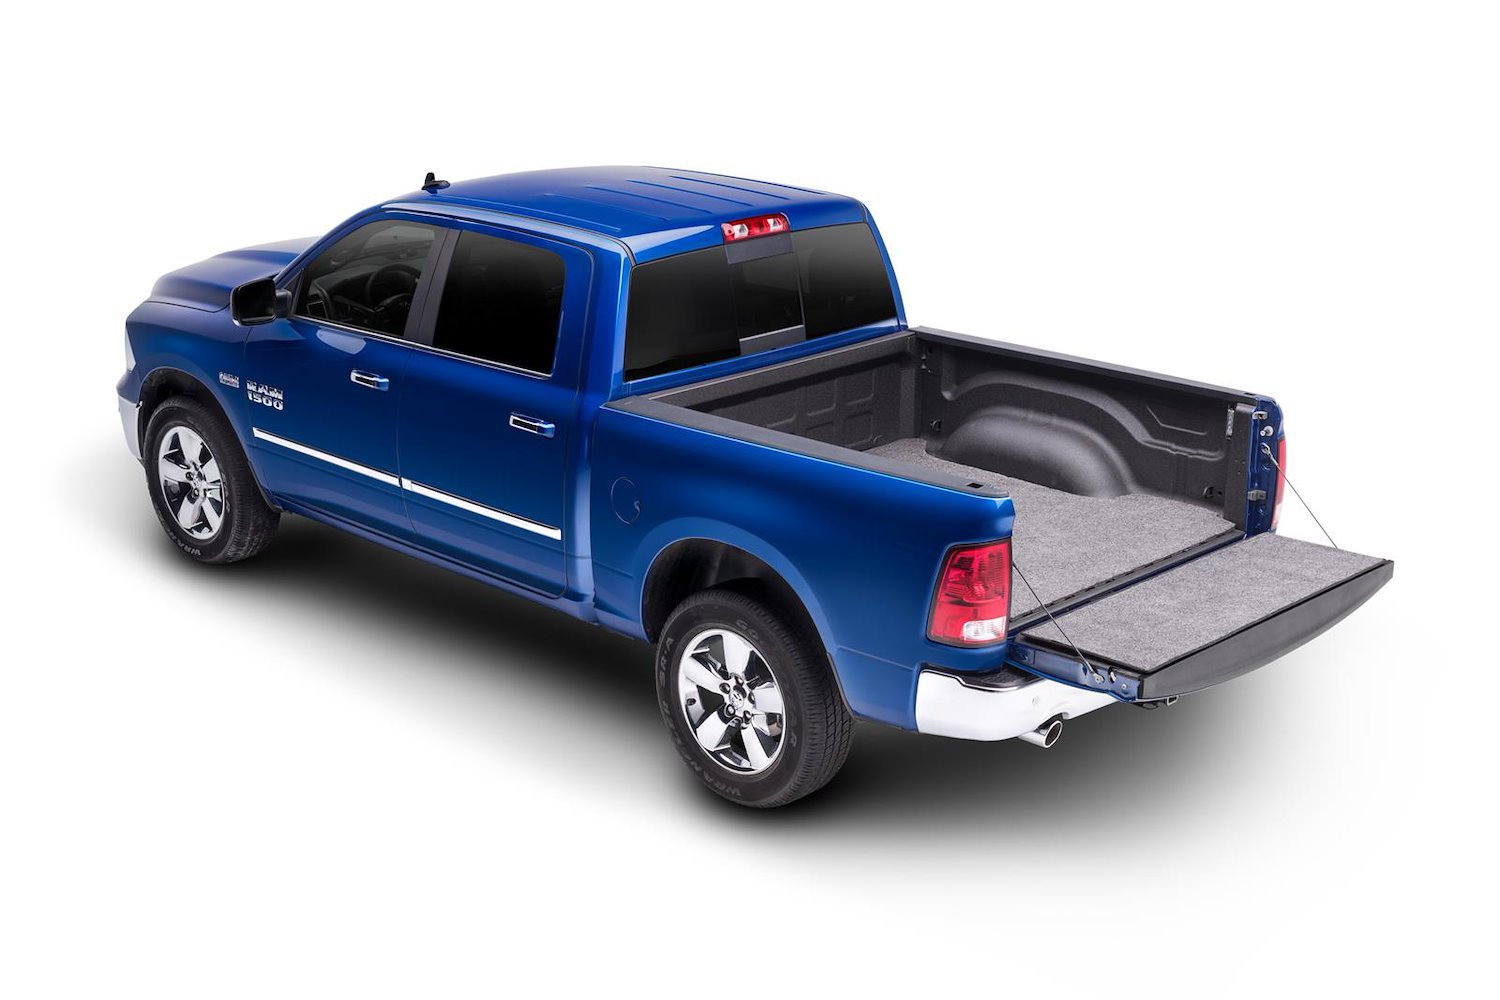 Mat Non-Liner/Spray-In Style 2002-2016 Dodge Ram